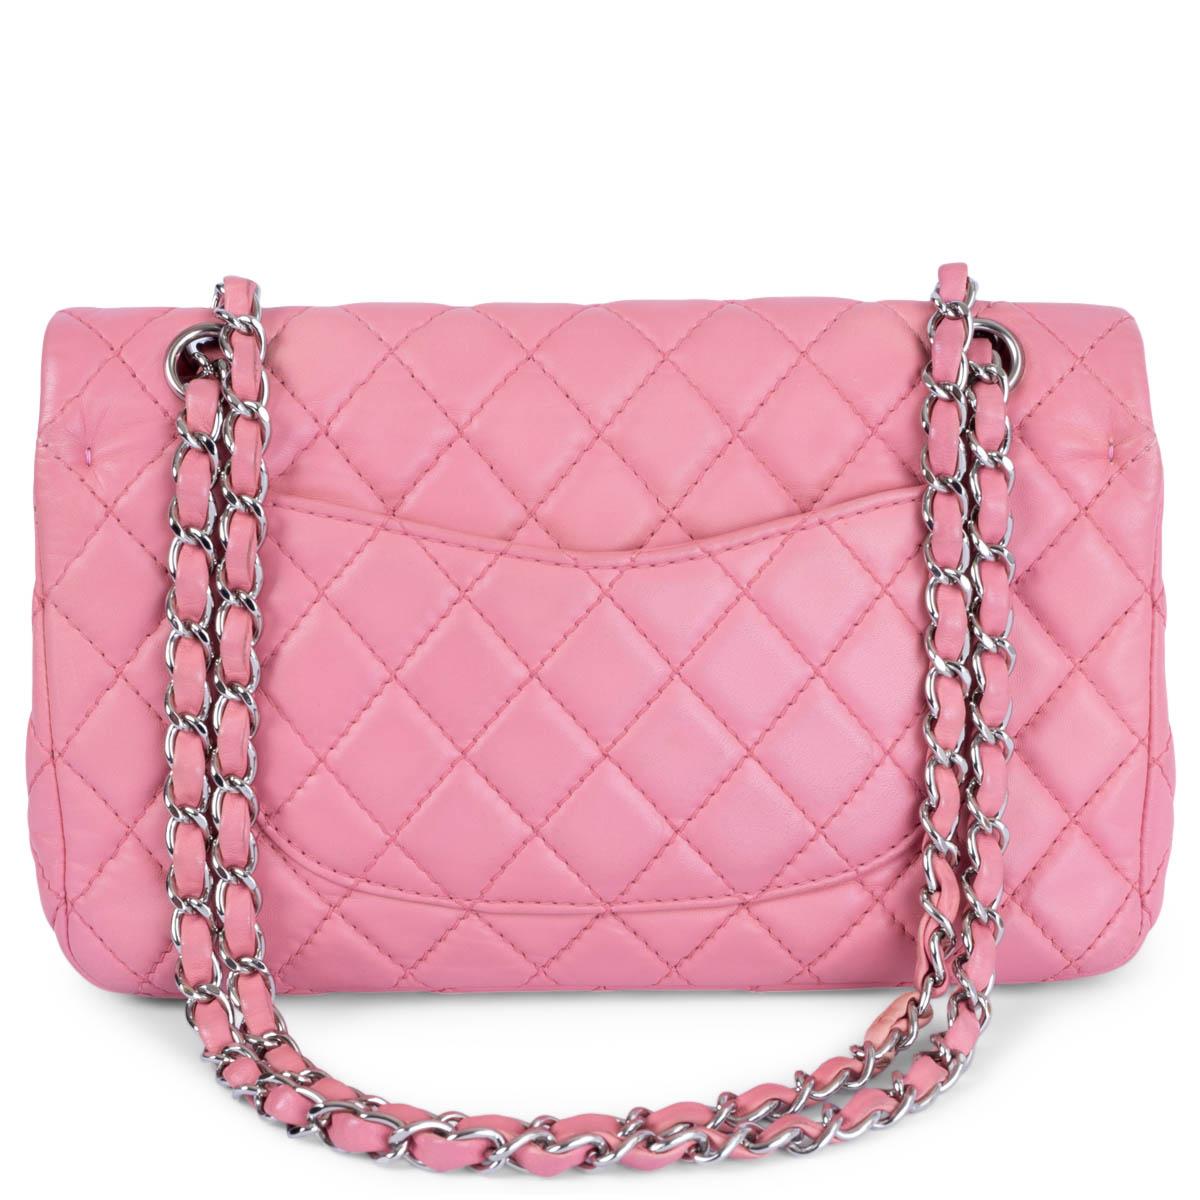 Pink CHANEL pink quilted lambskin leather SOFT CLASSIC MEDIUM TIMELESS Shoulder Bag For Sale